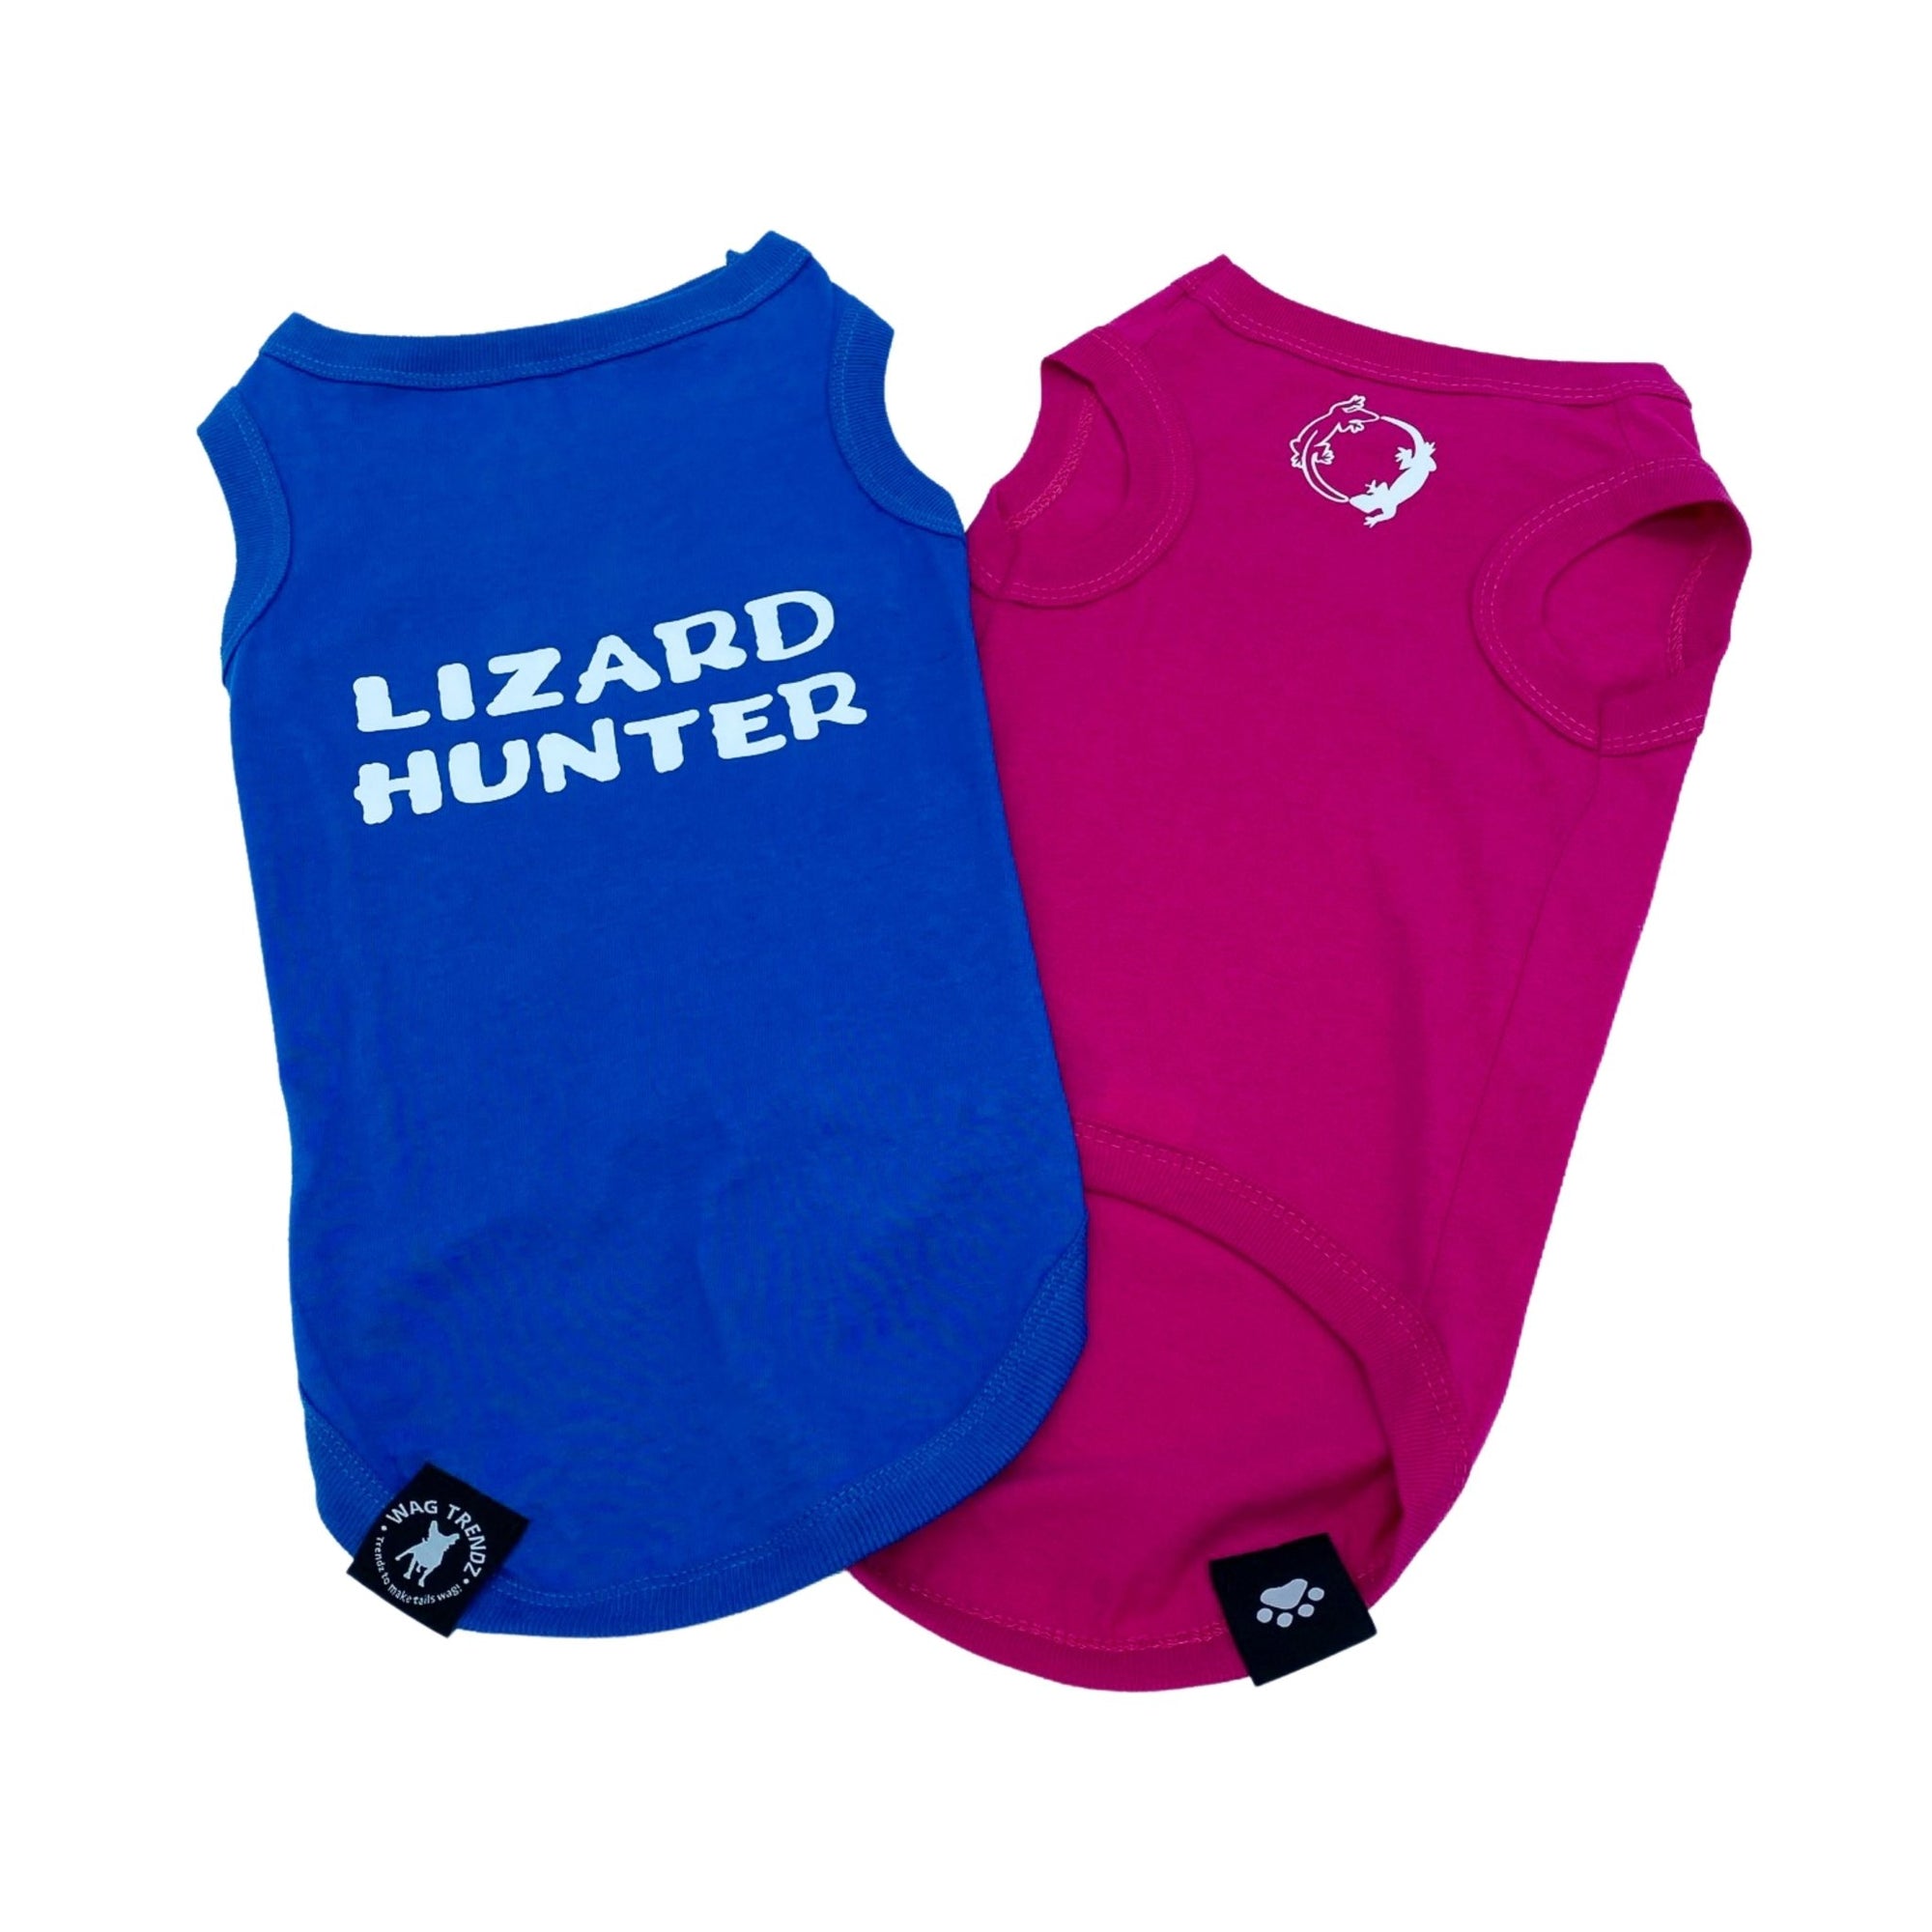 Dog T-Shirt - &quot;Lizard Hunter&quot; - Royal Blue and Hot Pink dog t-shirts - back view with Lizard Hunter lettering in white and chest view with lizards making a circle emoji - against solid white background - Wag Trendz